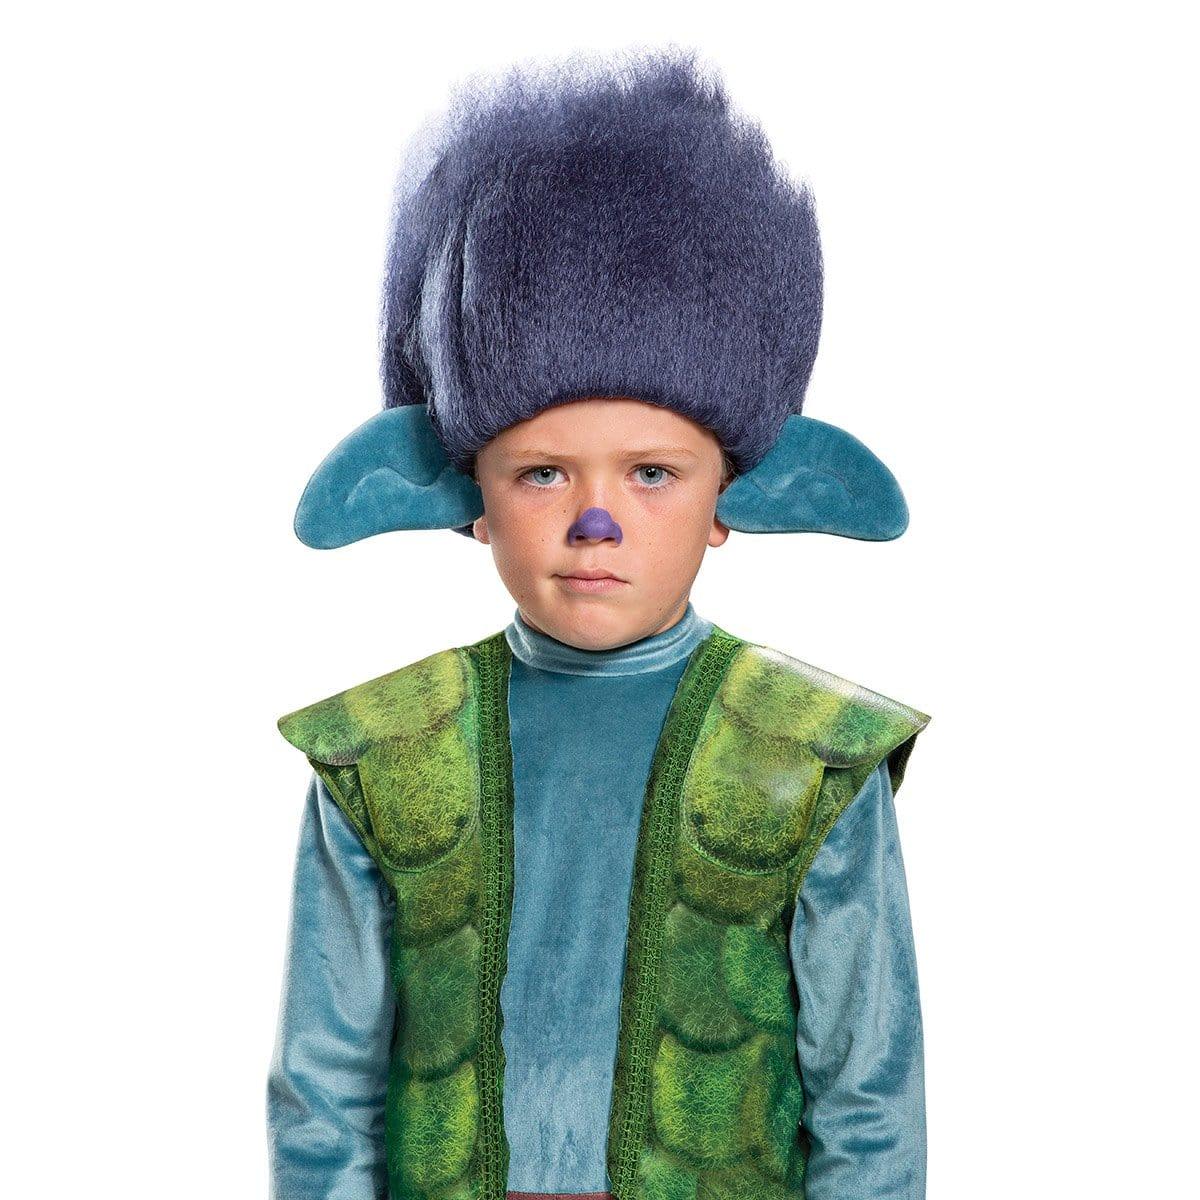 Buy Costume Accessories Branch wig with ears for boys, Trolls World Tour sold at Party Expert